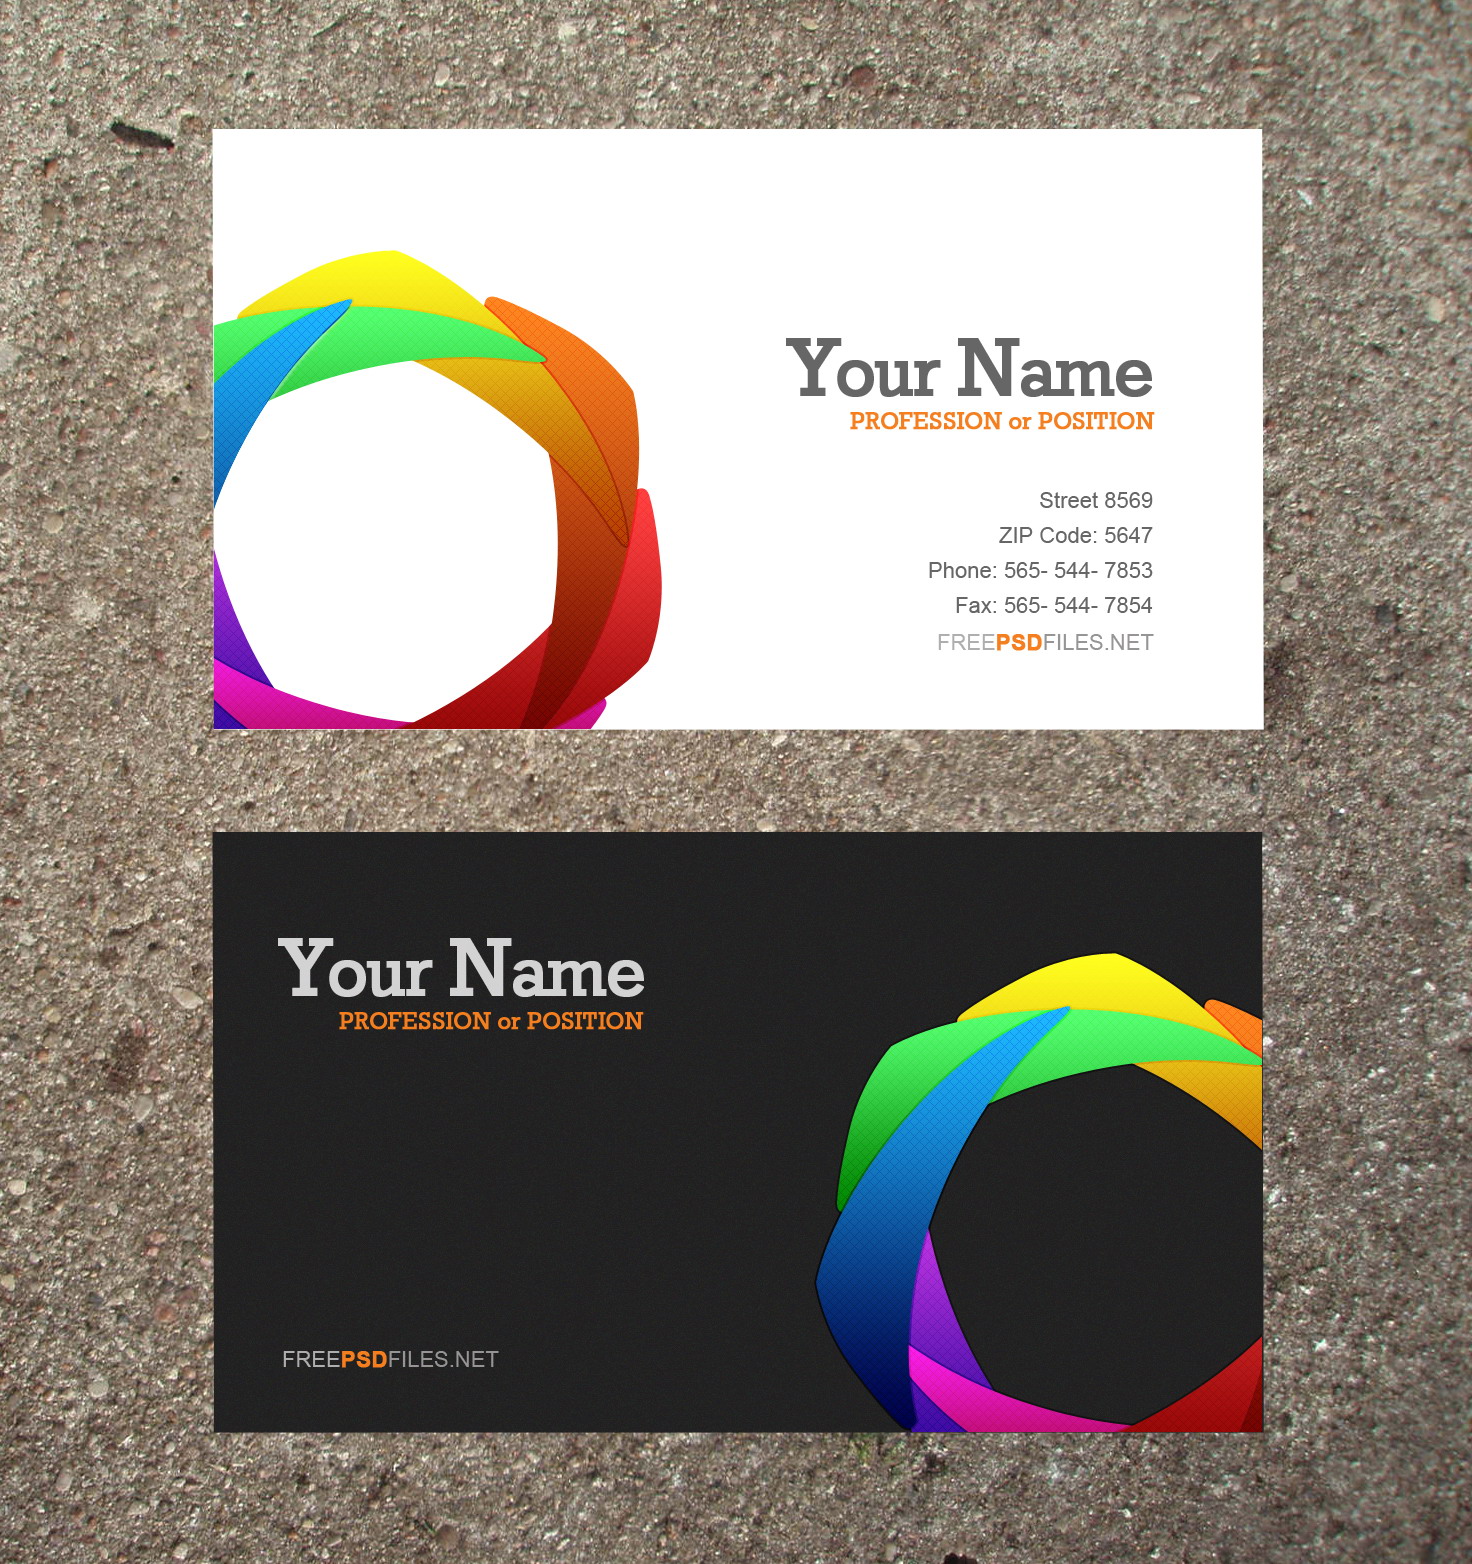 Free Business Card Templates Design Your Business Card